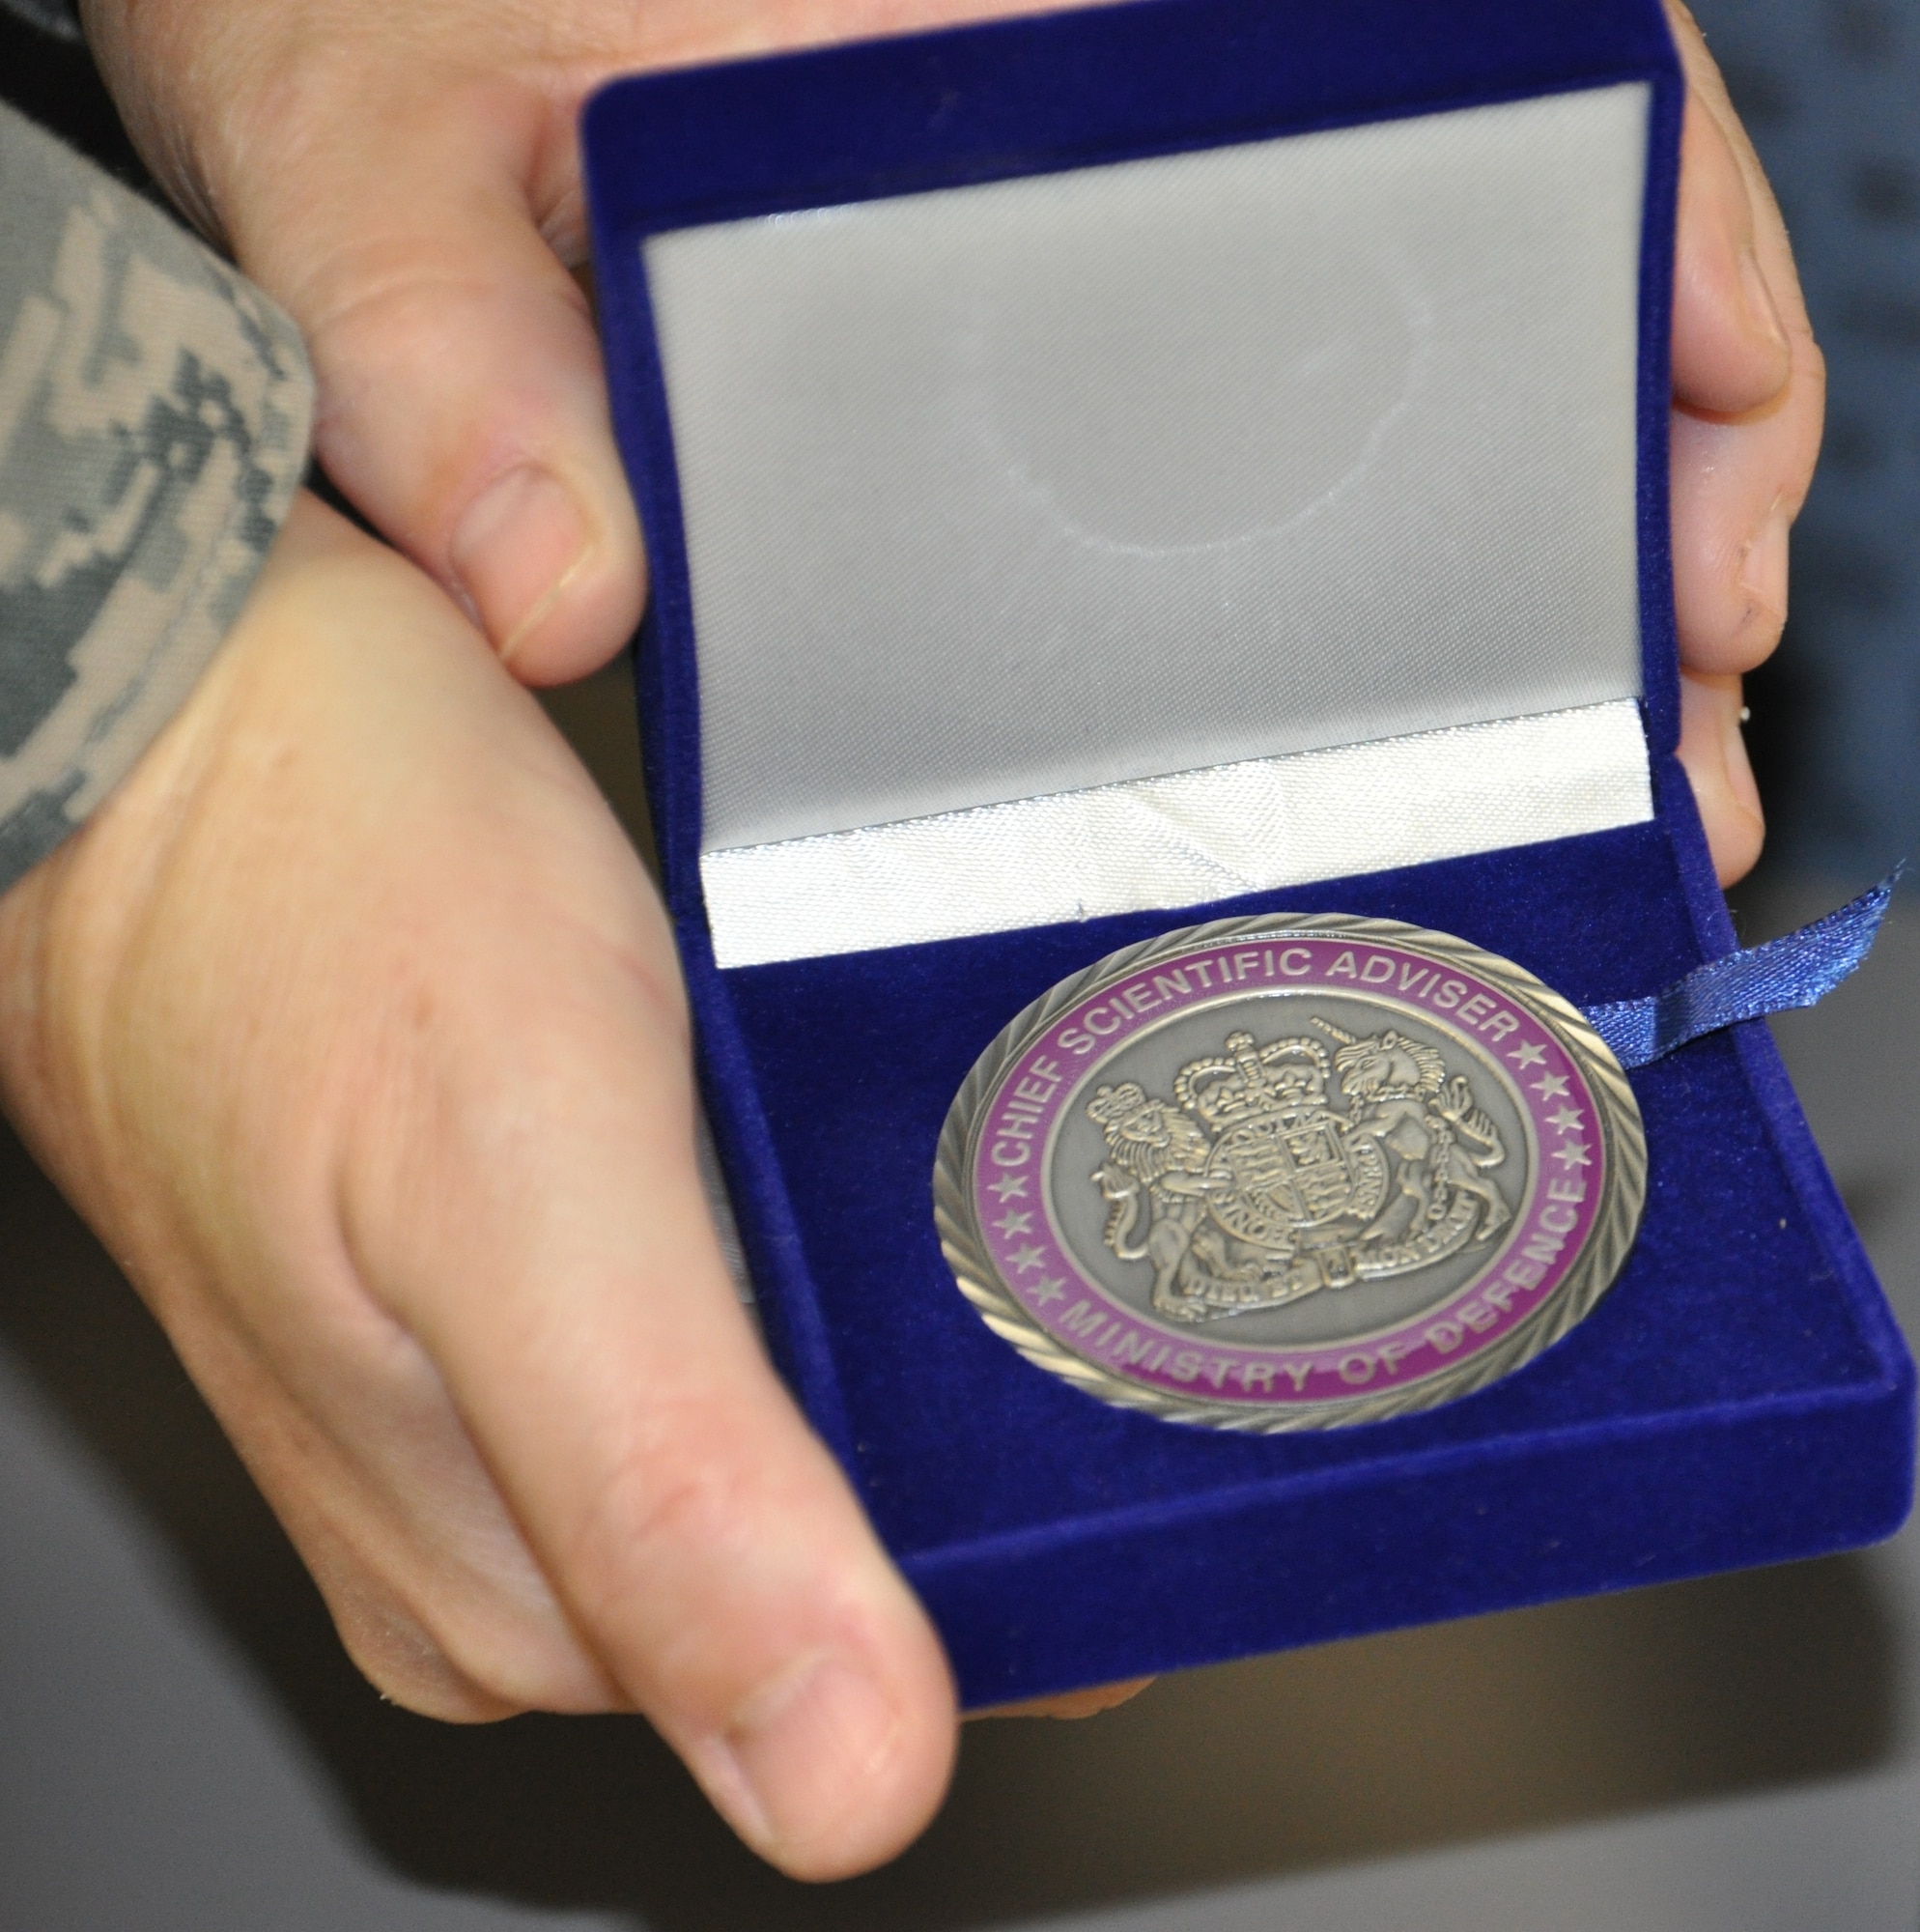 The Special Commendation Coin from the United Kingdom's Defence Science and Technology Laboratory is one of the highest honors bestowed upon Ministry of Defence researchers. (U.S. Air Force photo Chandra Lloyd)